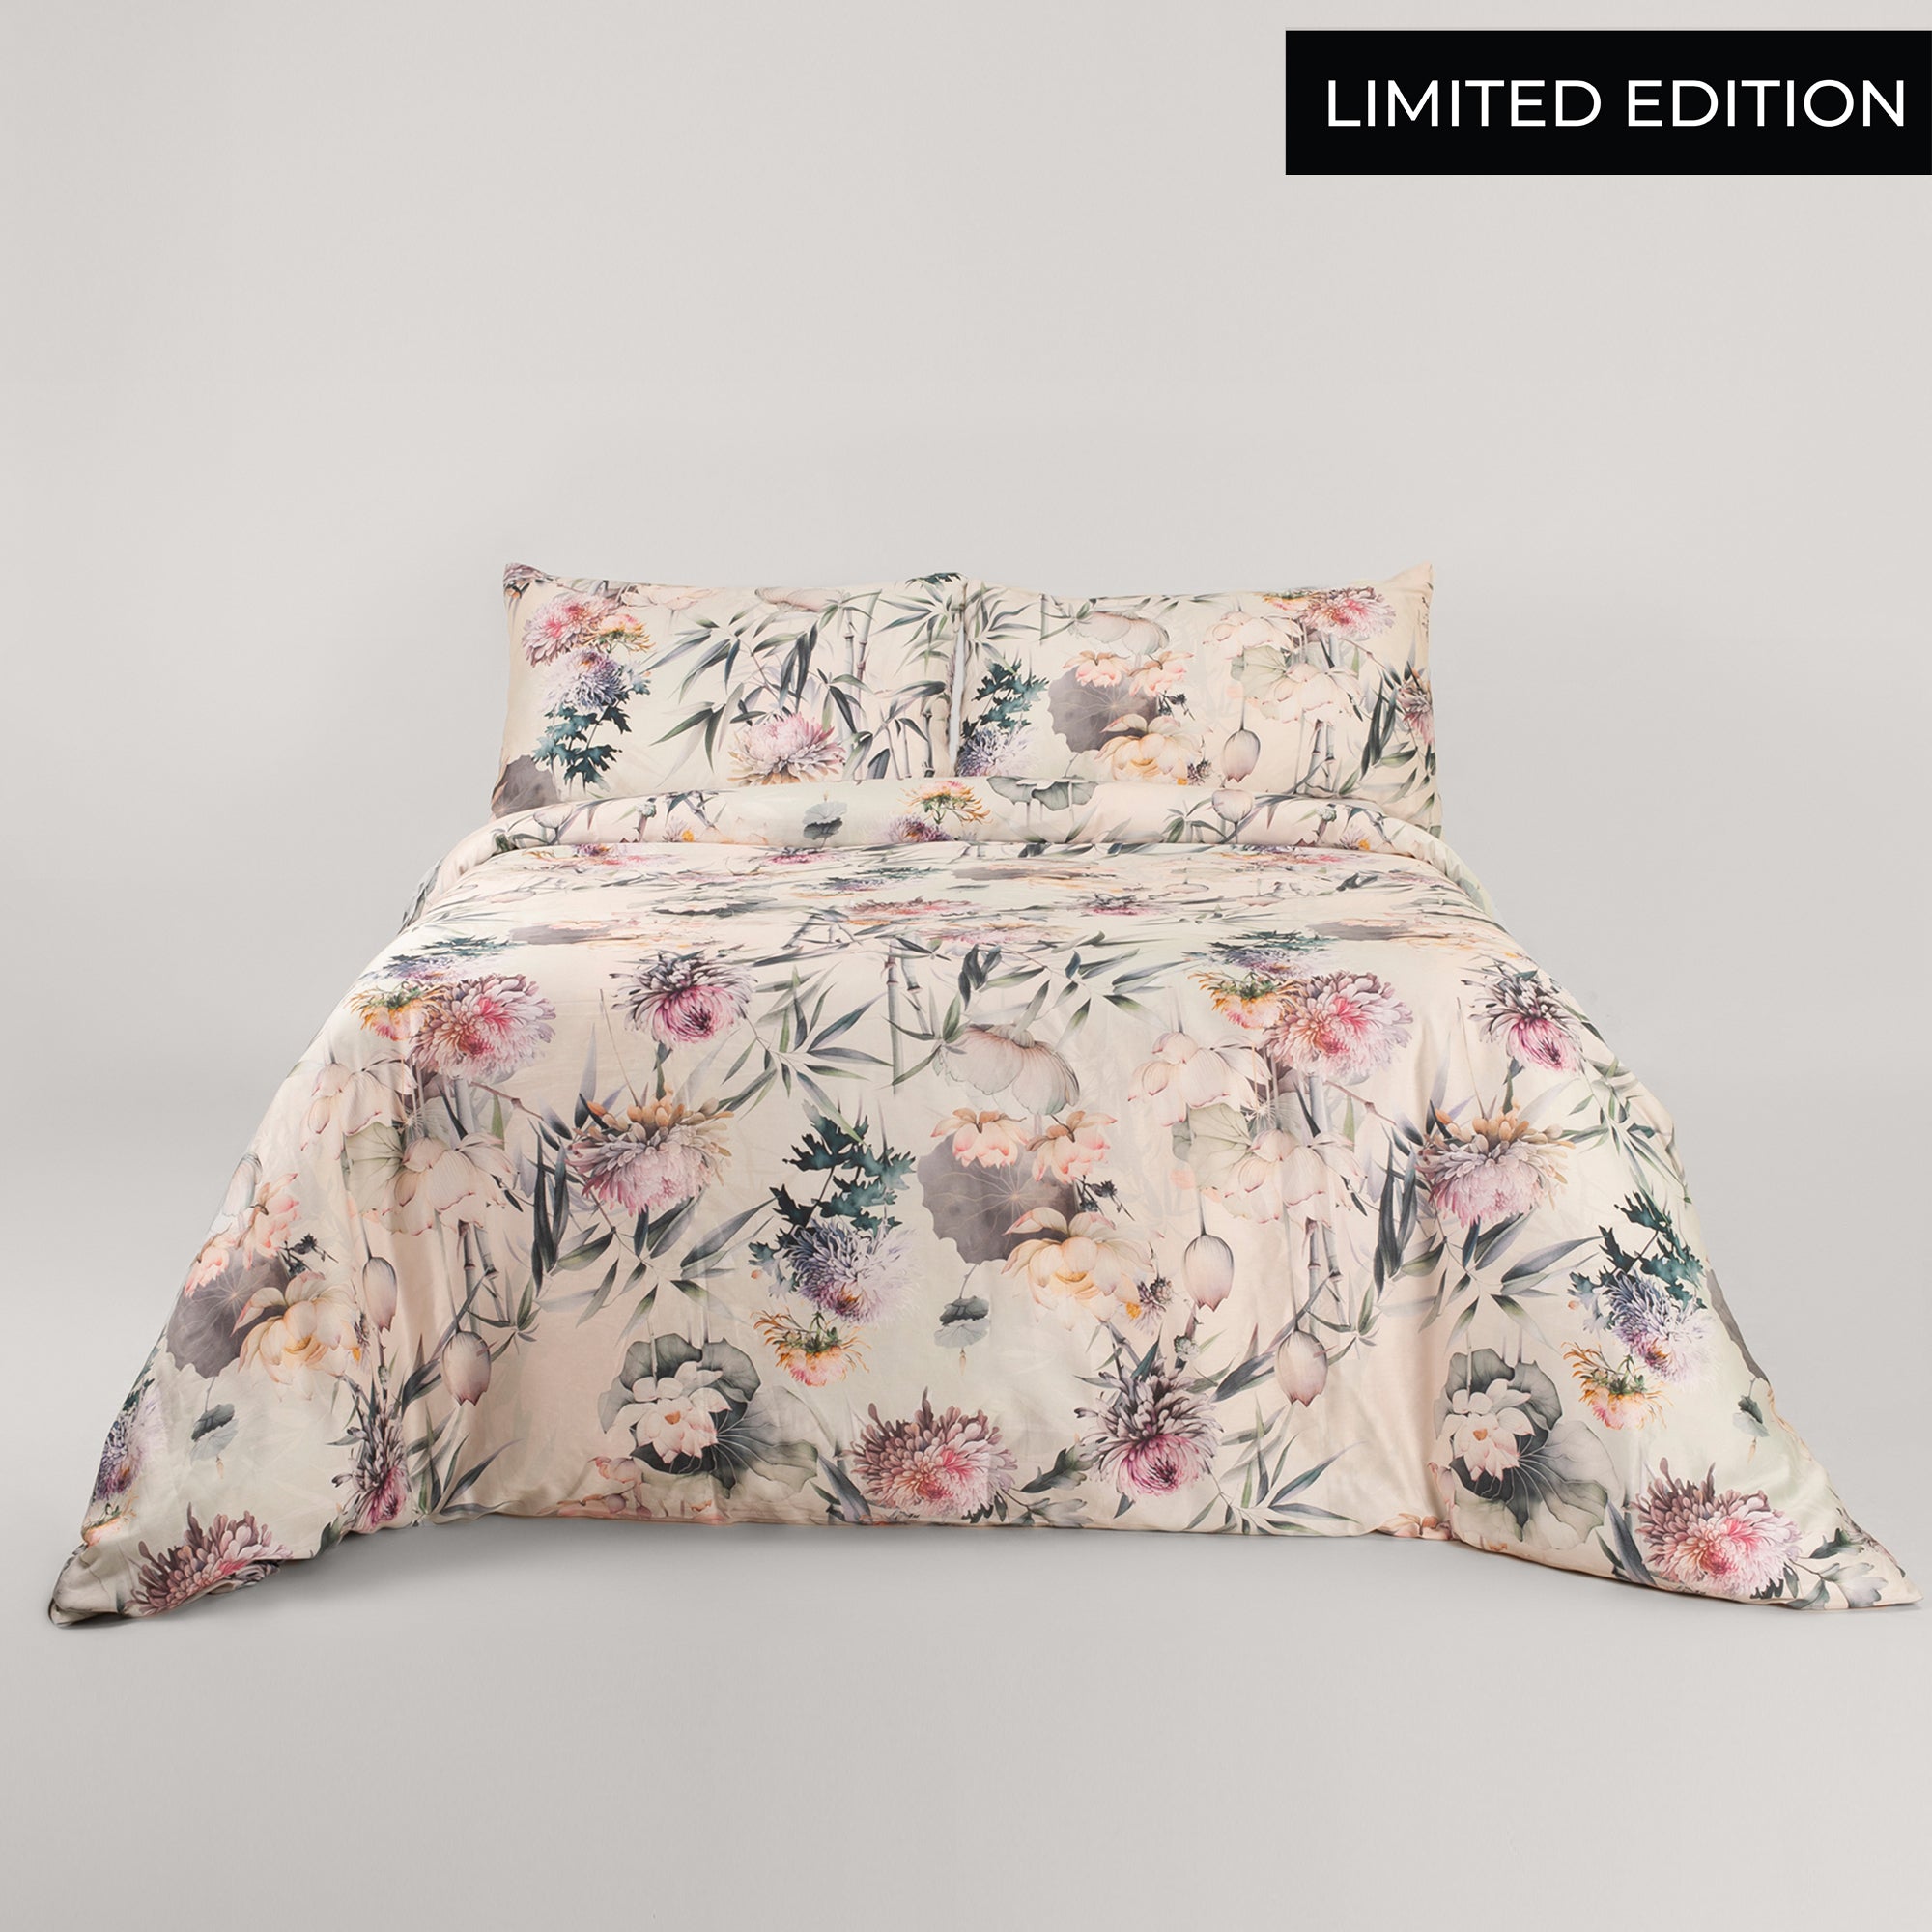 The Linen Company Bedding Pearlescent Duvet Cover Set